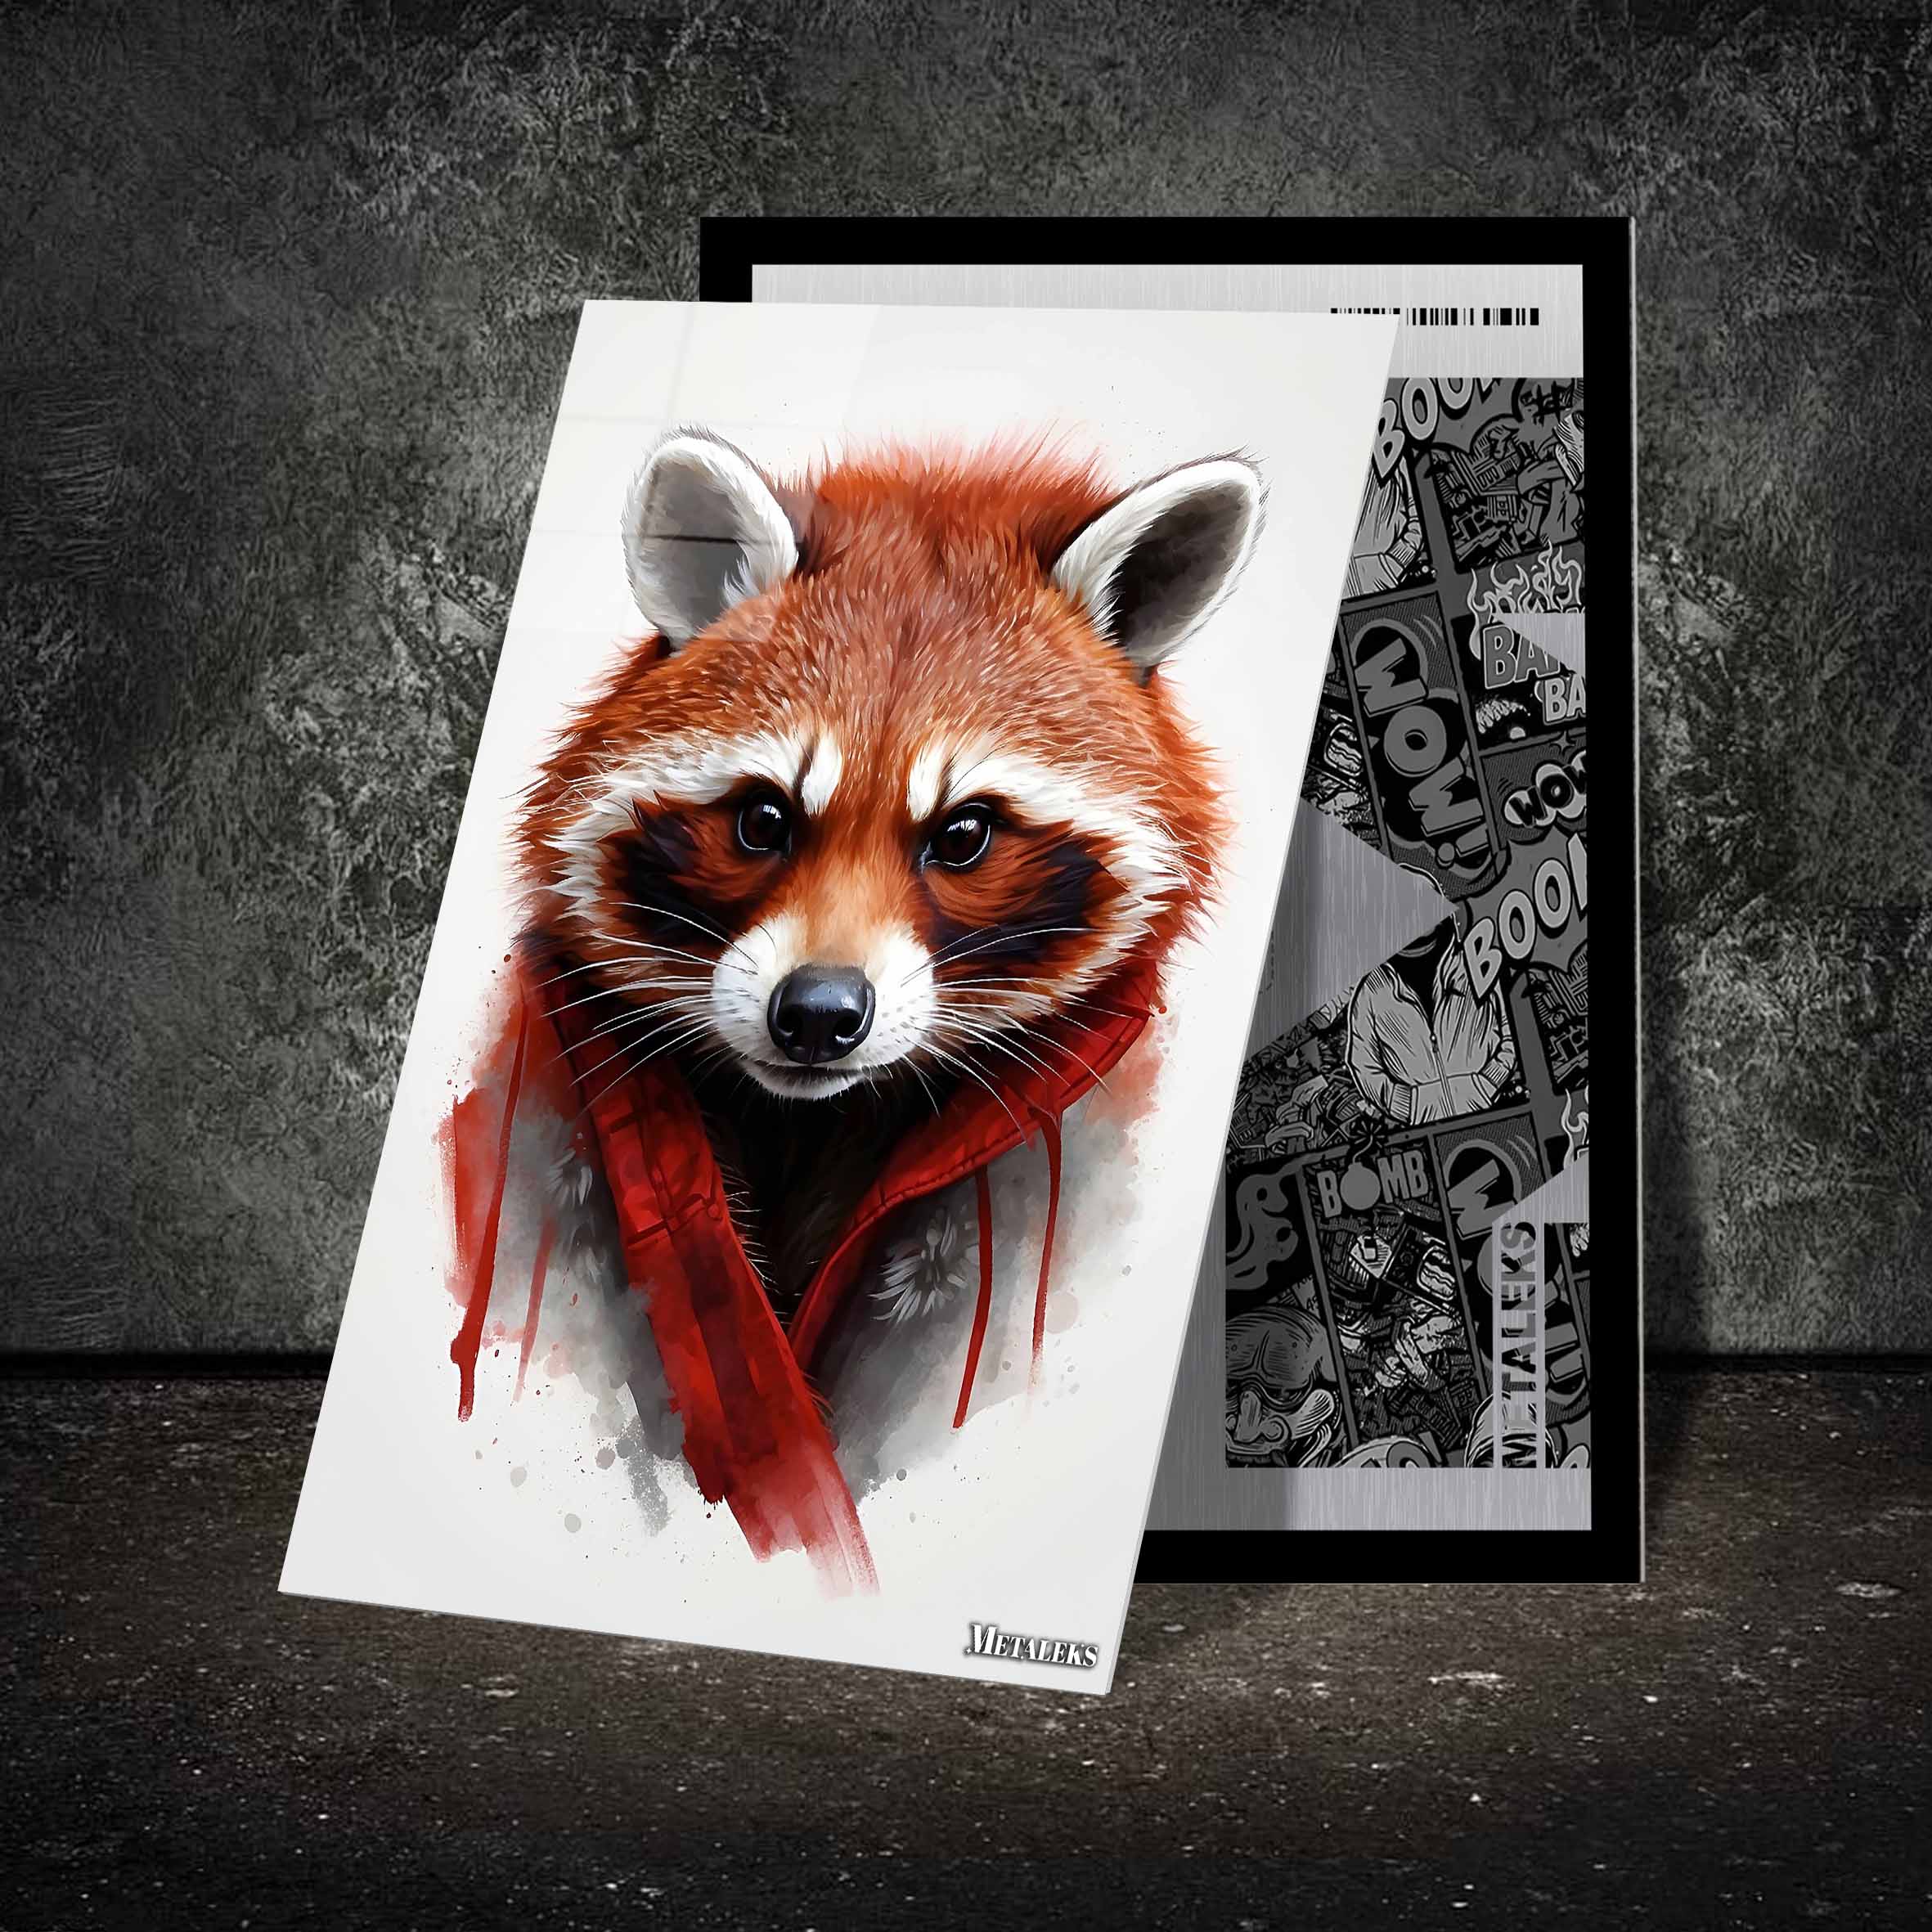 Crimson Mask: The Radiant Gaze of the Red Raccoon-designed by @maximise